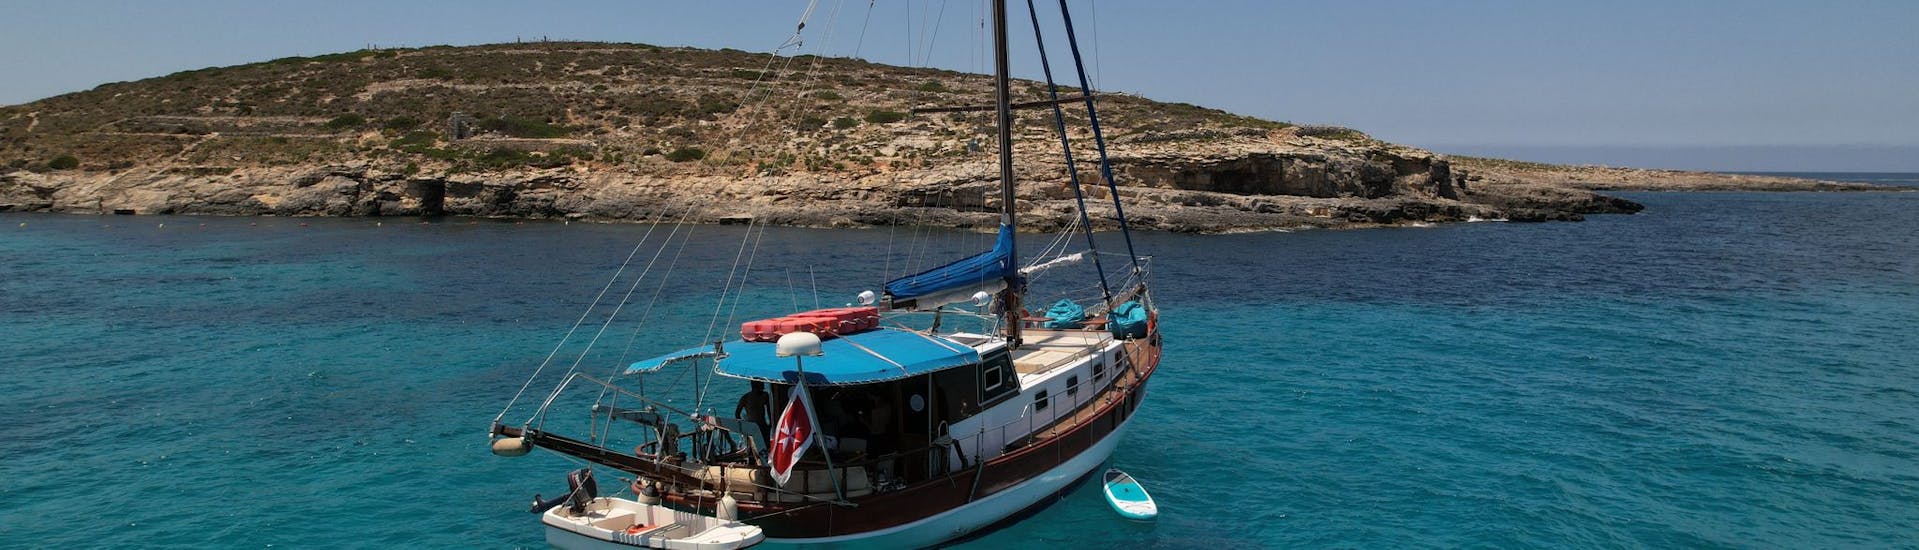 The boat Gulet KelSea is floating in the ocean while Gulet Boat Rental in Sliema (up to 25 people) with Skipper organized by Malta Gulet Charters.